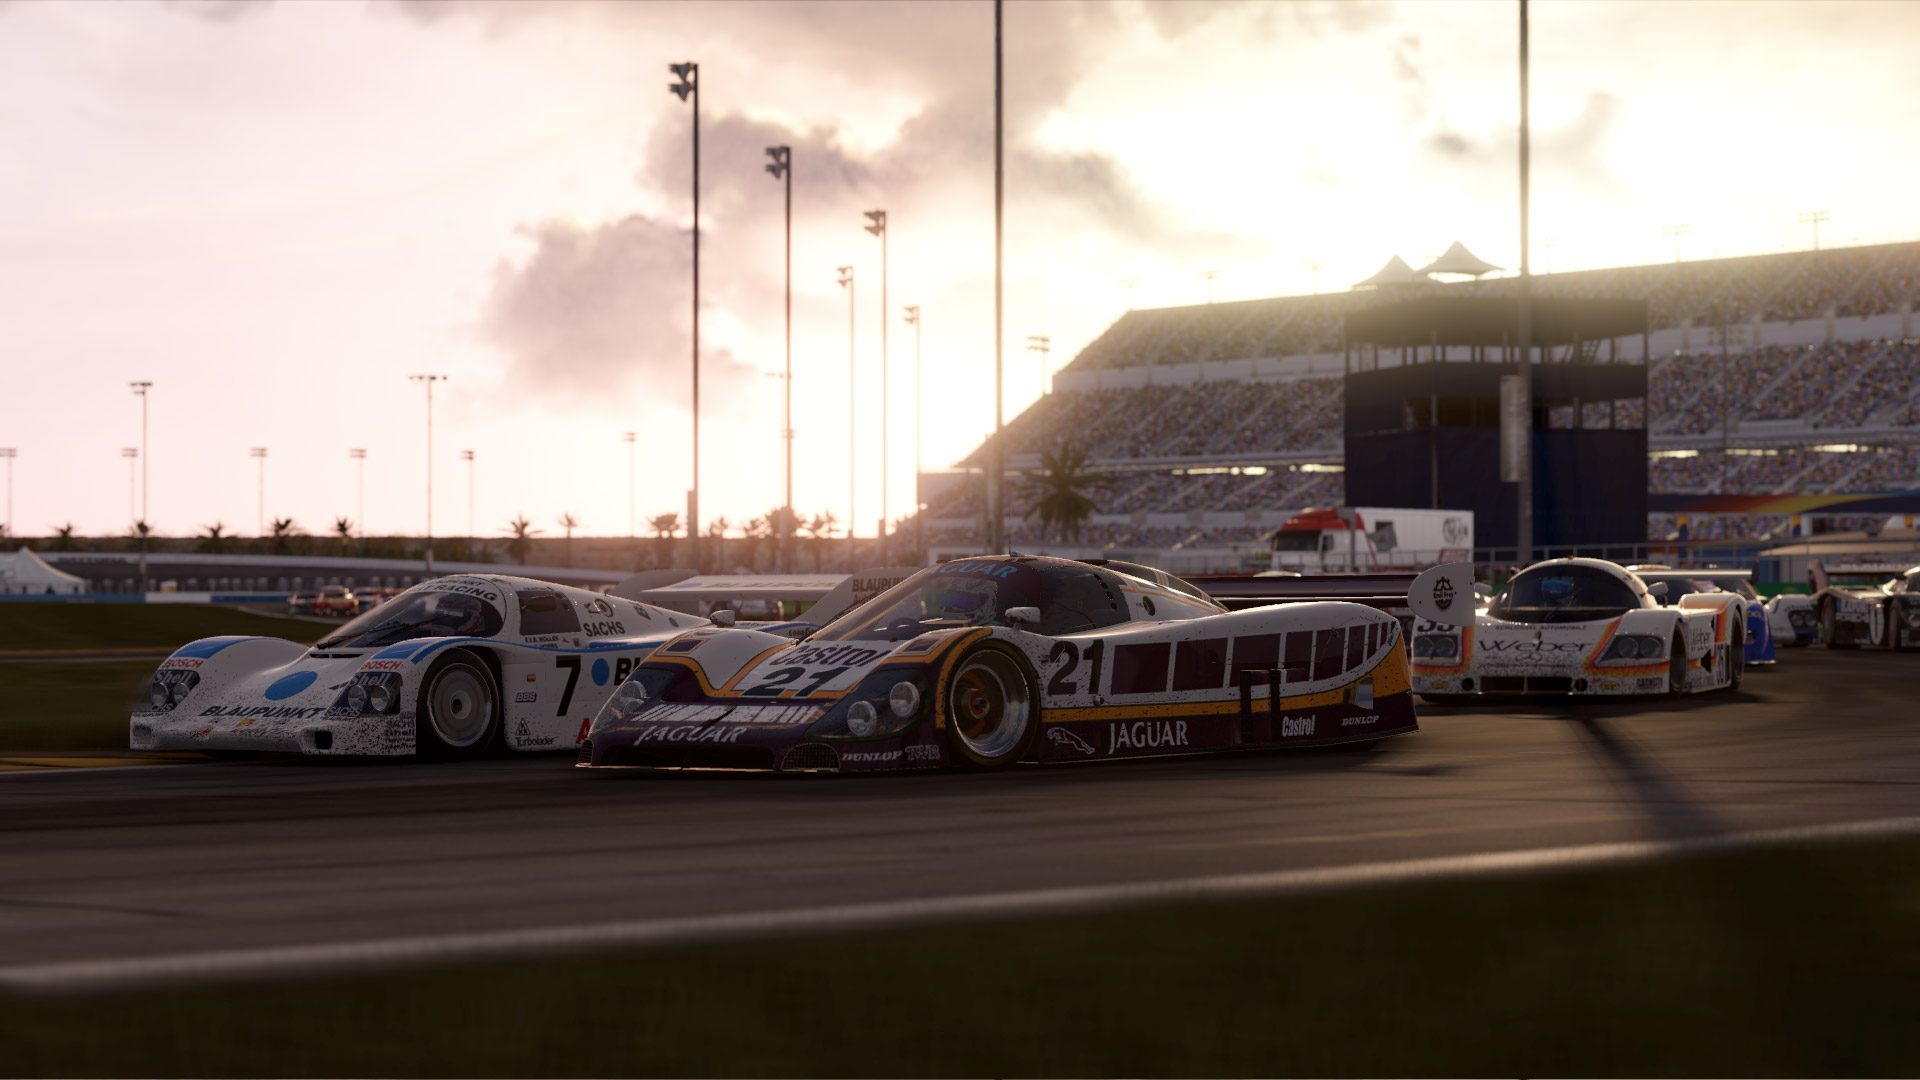 Project CARS 2' VR Review – An Ambitious Sequel With Serious Potential